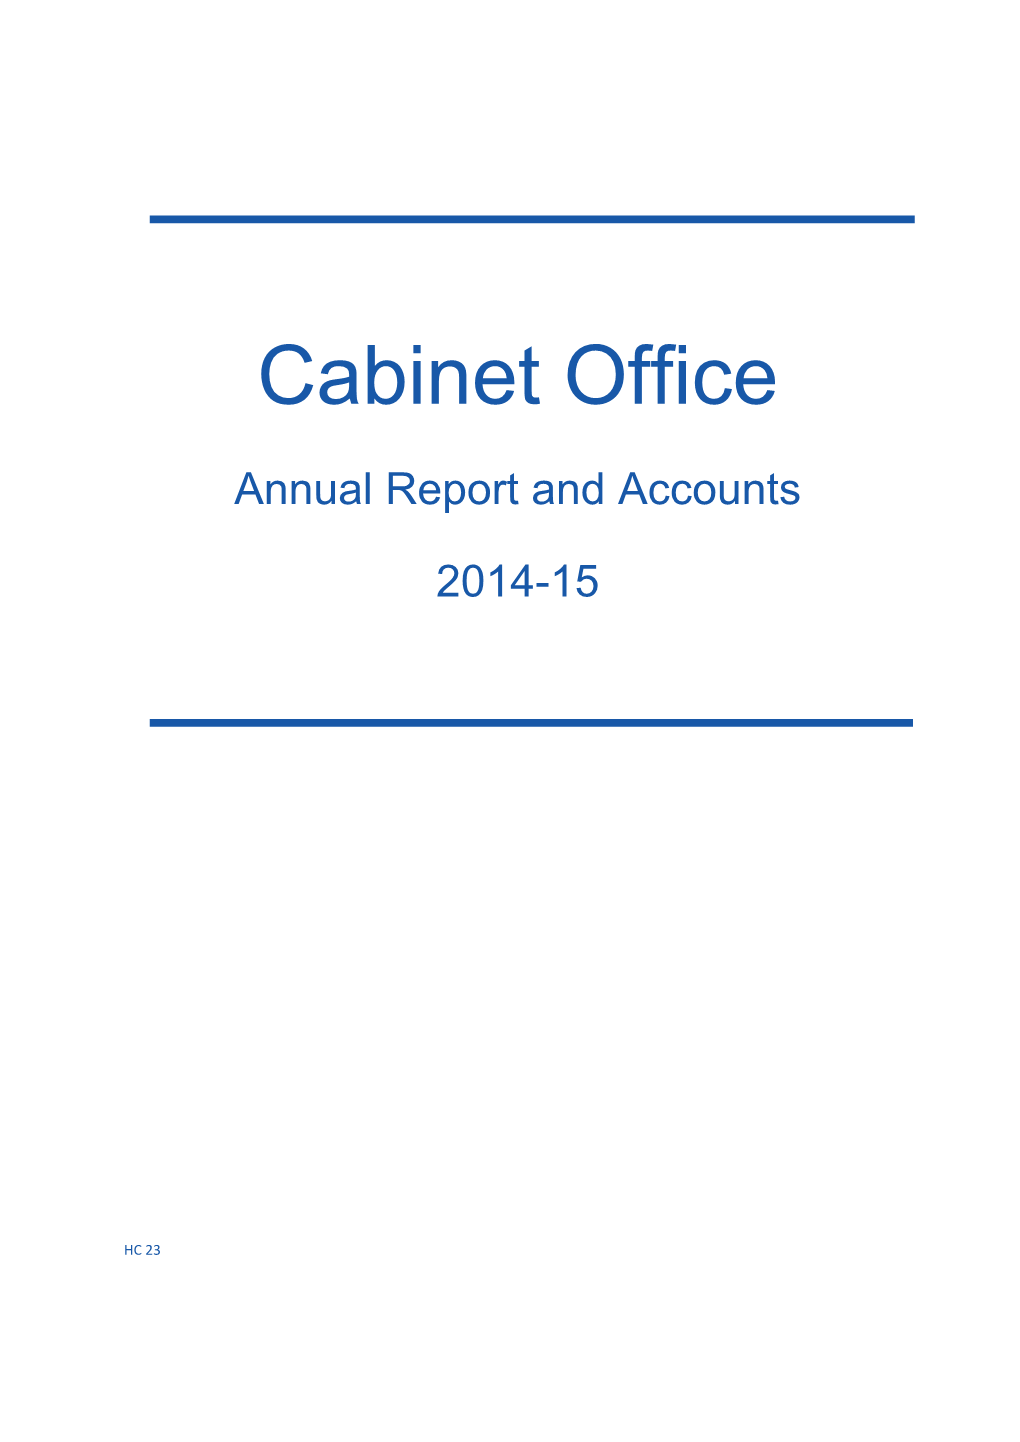 Cabinet Office Annual Report and Accounts 2014-15